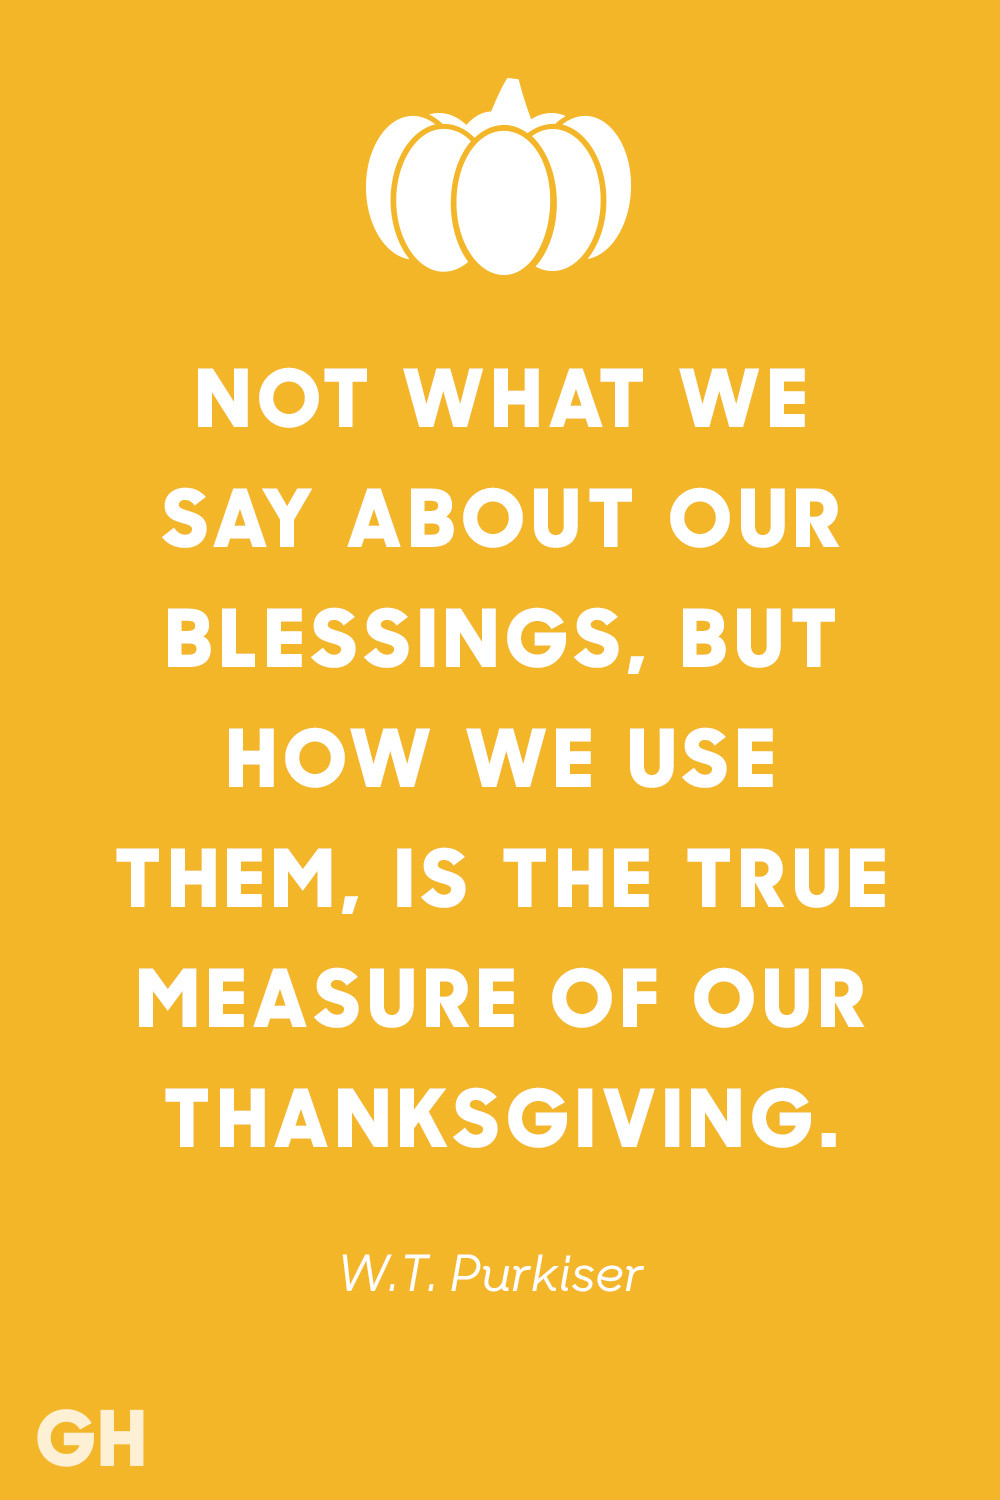 Quotes About Thanksgiving
 15 Best Thanksgiving Quotes Inspirational and Funny